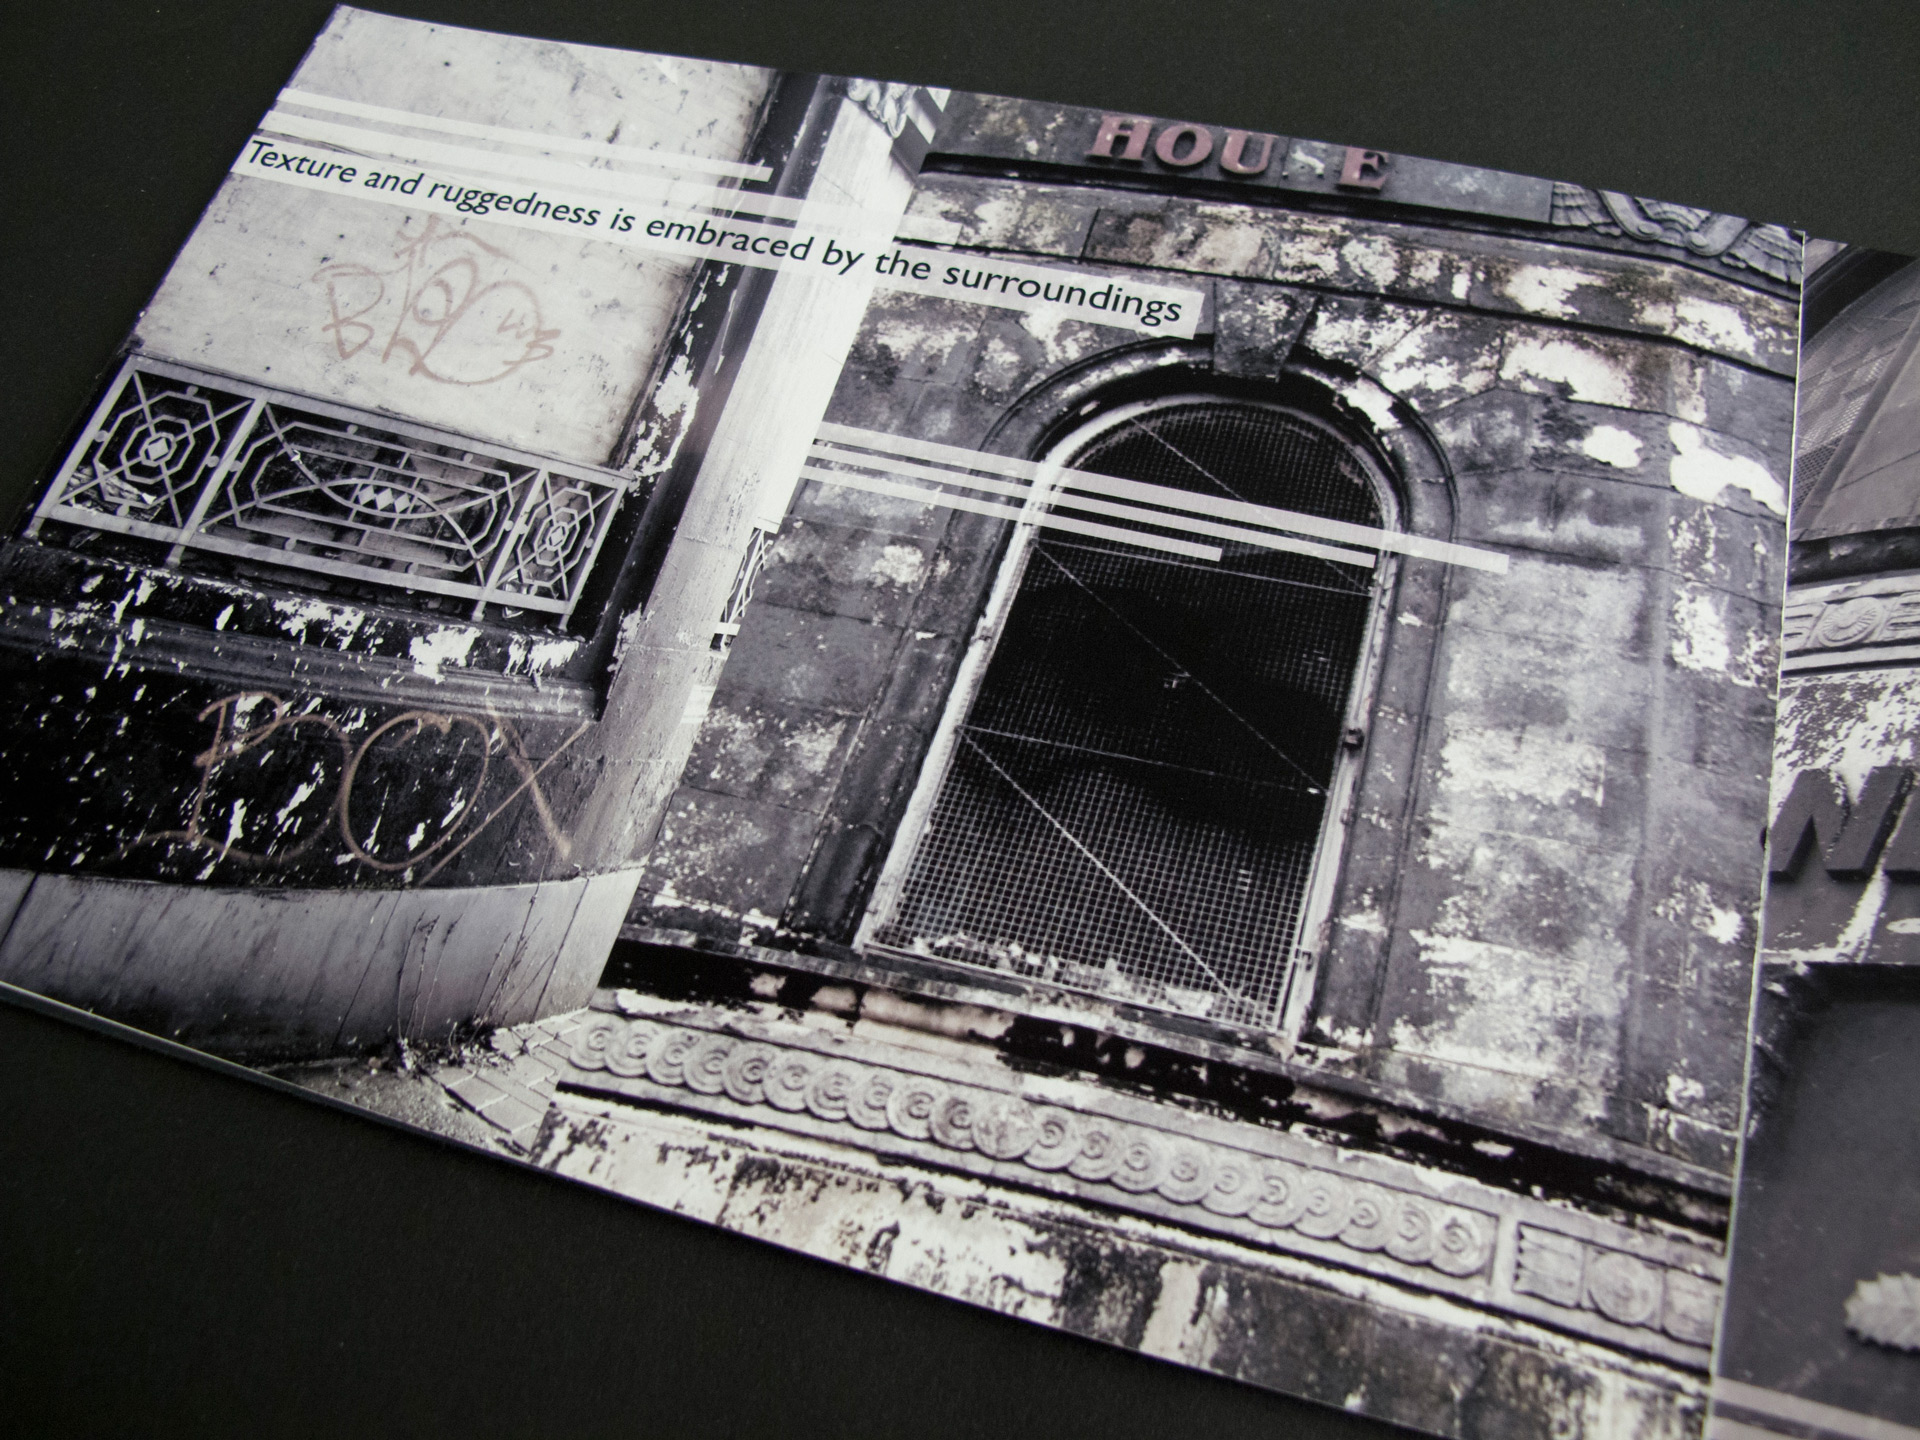 On this page of the booklet, there are two desaturated photographs depicting buildings in a state of disrepair. The images are zoomed in and show worn-out paint and graffiti on the walls. Overlaid on the photograph are the words 'Texture and ruggedness is embraced by the surroundings'.